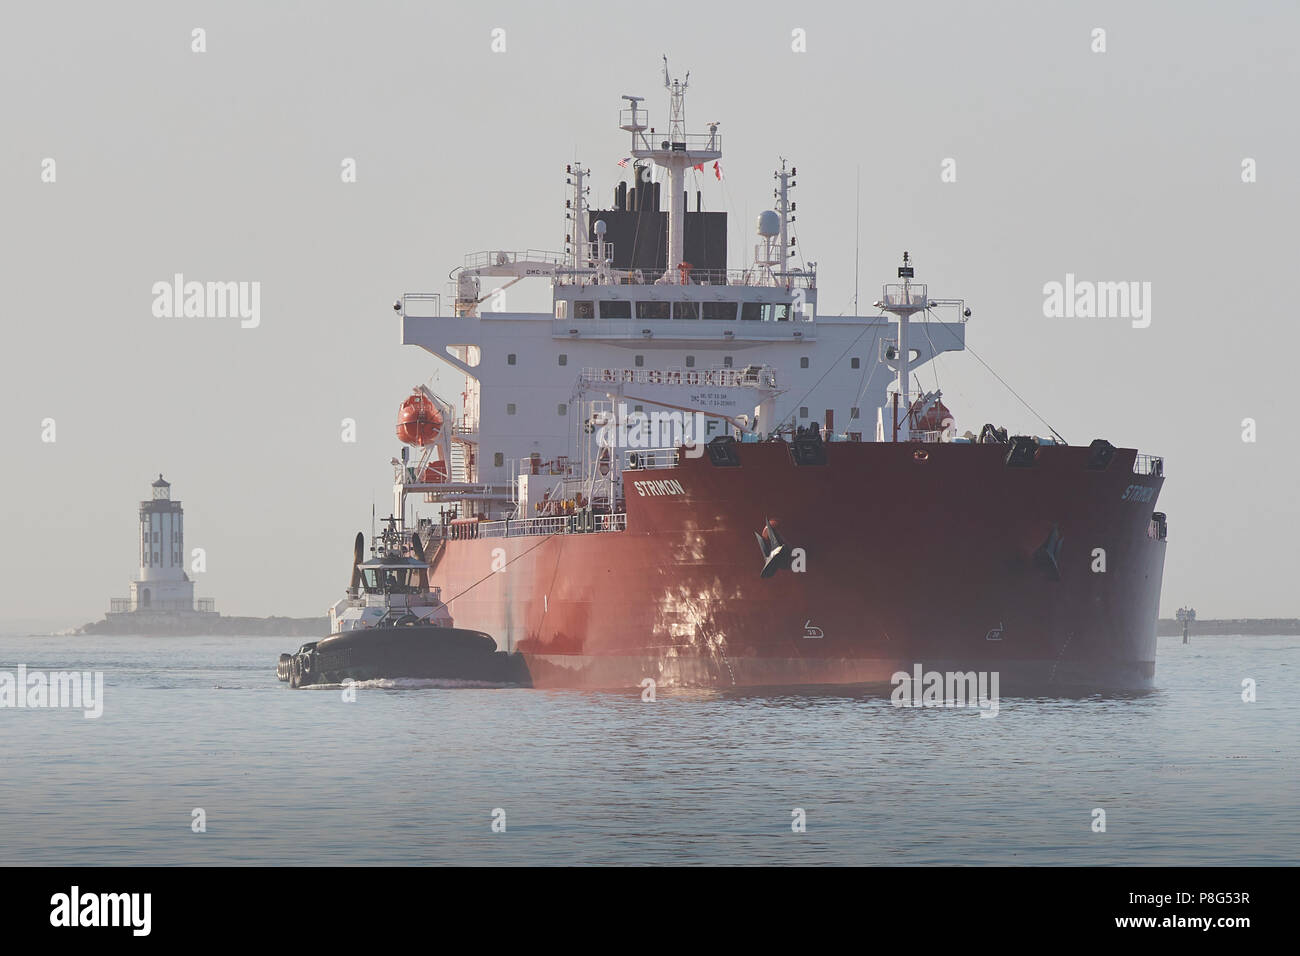 CHEMICAL/OIL PRODUCTS TANKER, STRIMON, Assisted By Tugboats, Enters The Los Angeles Main Channel At The Port Of Los Angeles, California. Stock Photo